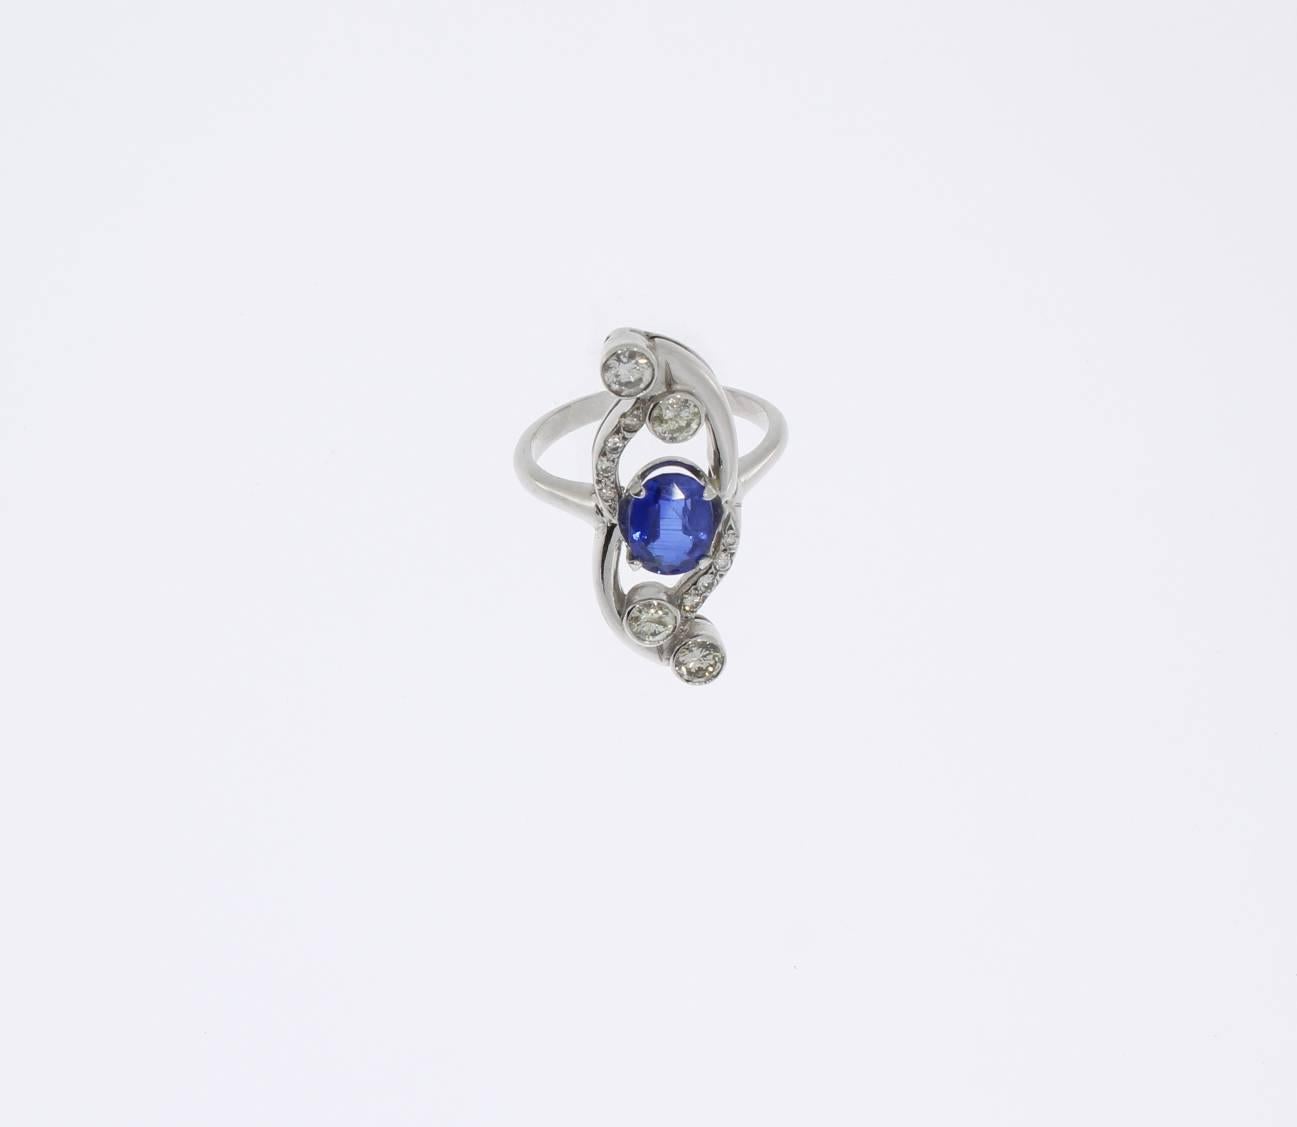 Set with faceted transparent blue Kyanite in oval shape weighing approximately 1,66 carat and 12 diamonds with a total weight of 0,80 carat, clarity VS1. Mounted in 18 K white gold. Hallmarked with the purity 750. Weight: 7,79 grams. 
Ring size 55 (